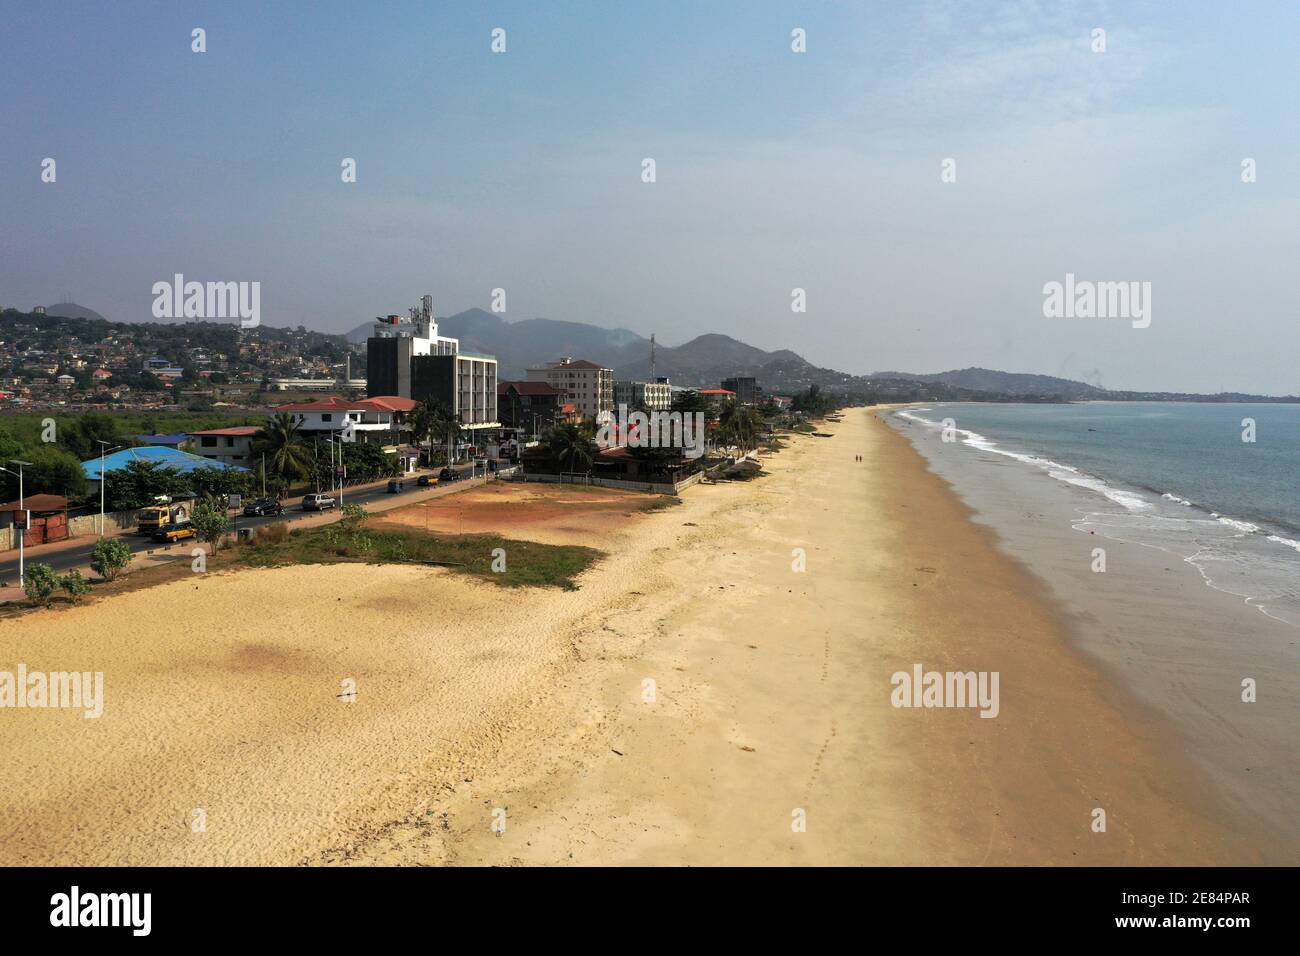 Freetown Sierra Leone Africa sandy beach pollution. West Africa extreme poverty and hunger. Pollution on ocean beaches. Tropical climate environment. Stock Photo